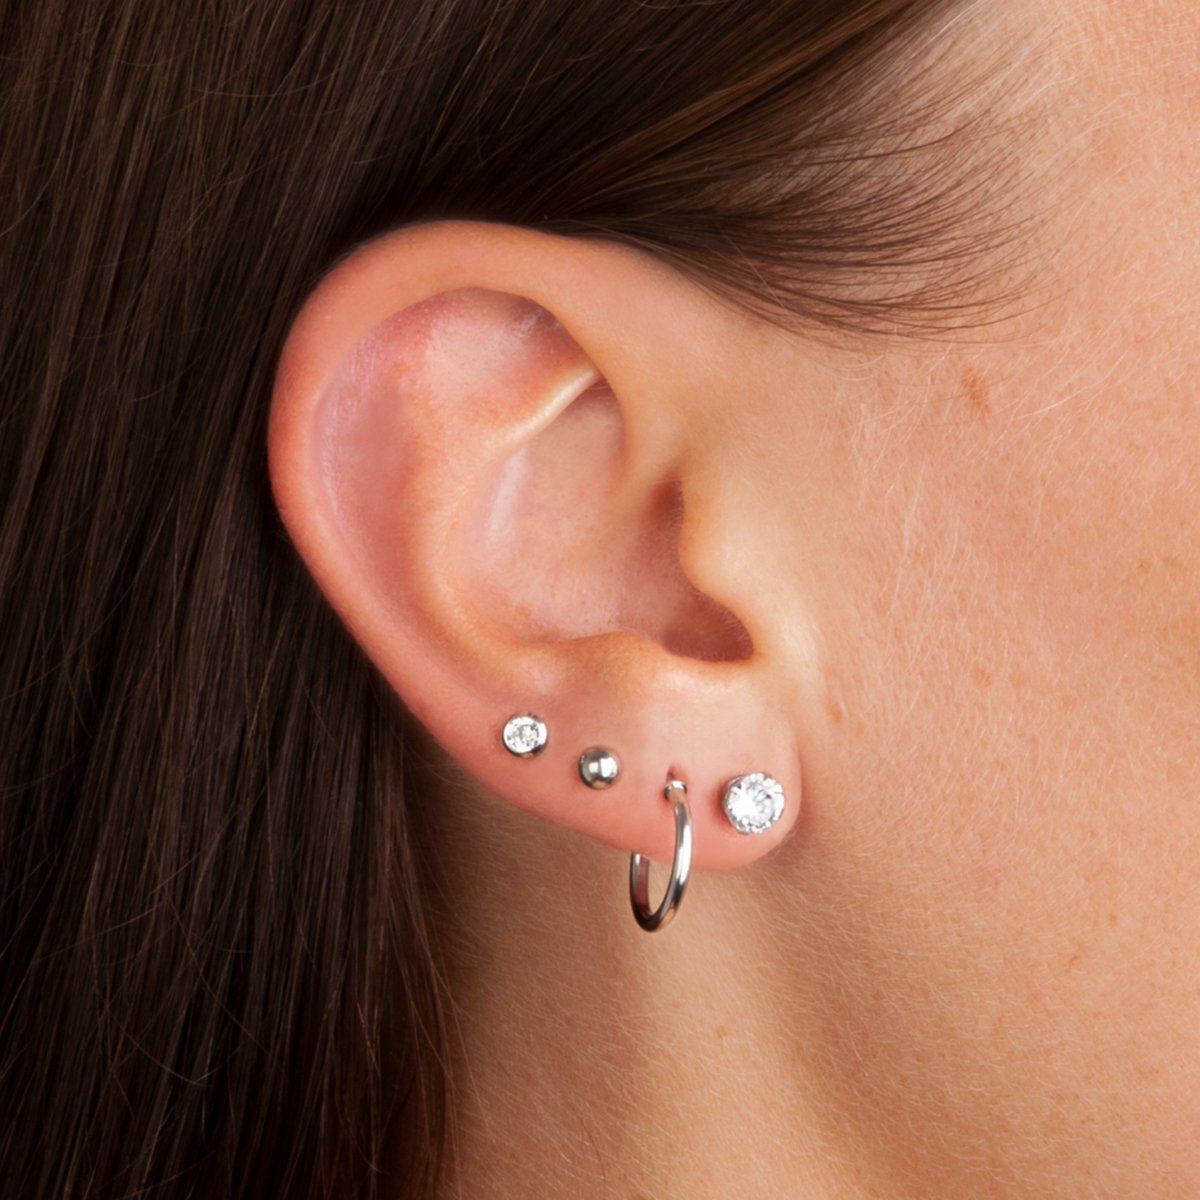 Detail Pictures Of Ear Piercings Nomer 15